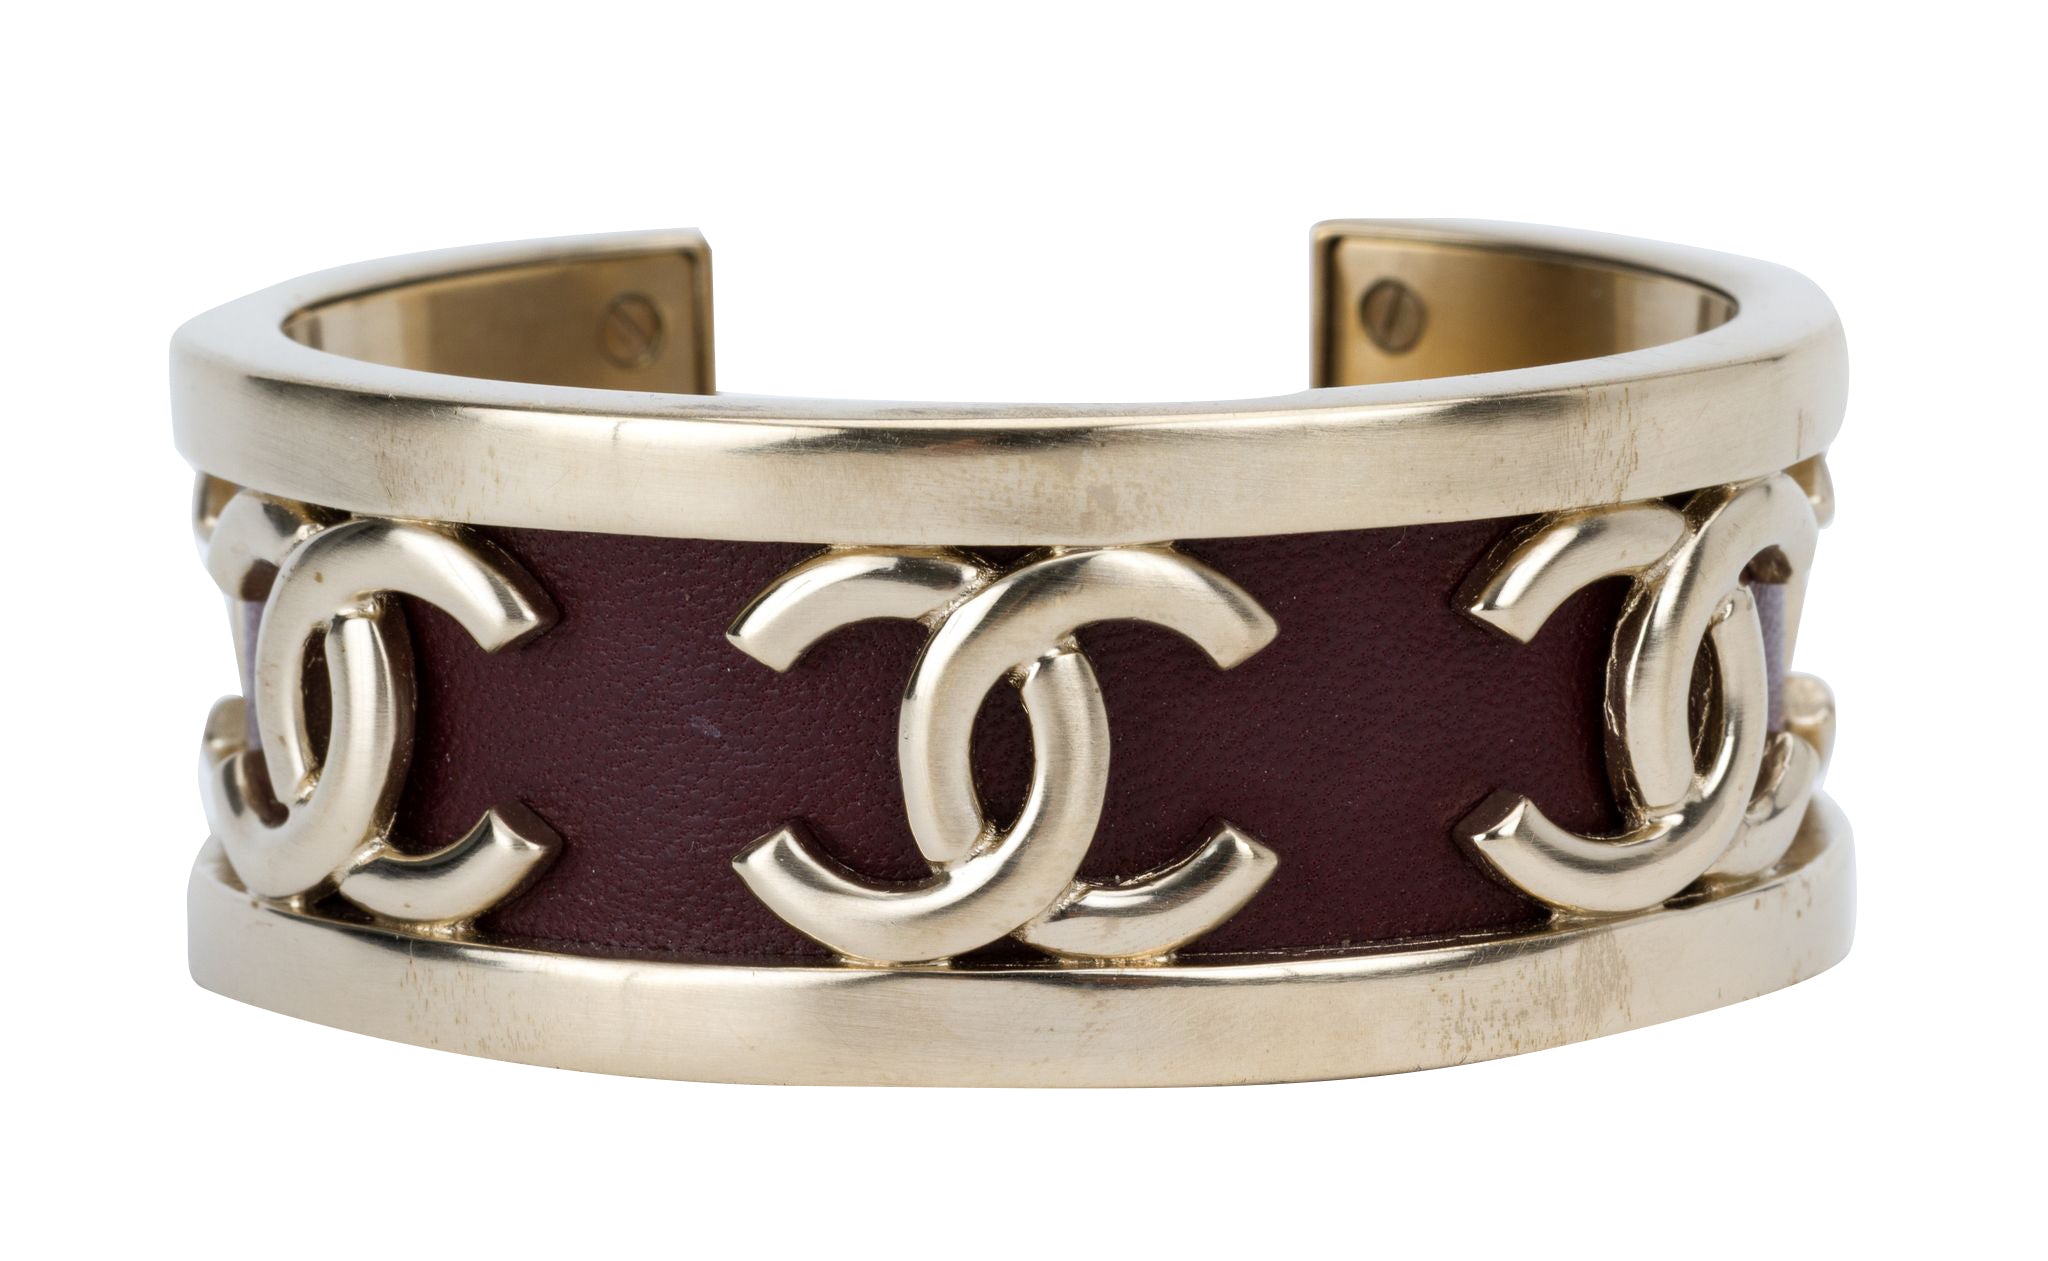 CHANEL CC Logos Chain Used Bracelet Gold Plated Black Leather 97A #BQ134 |  eBay